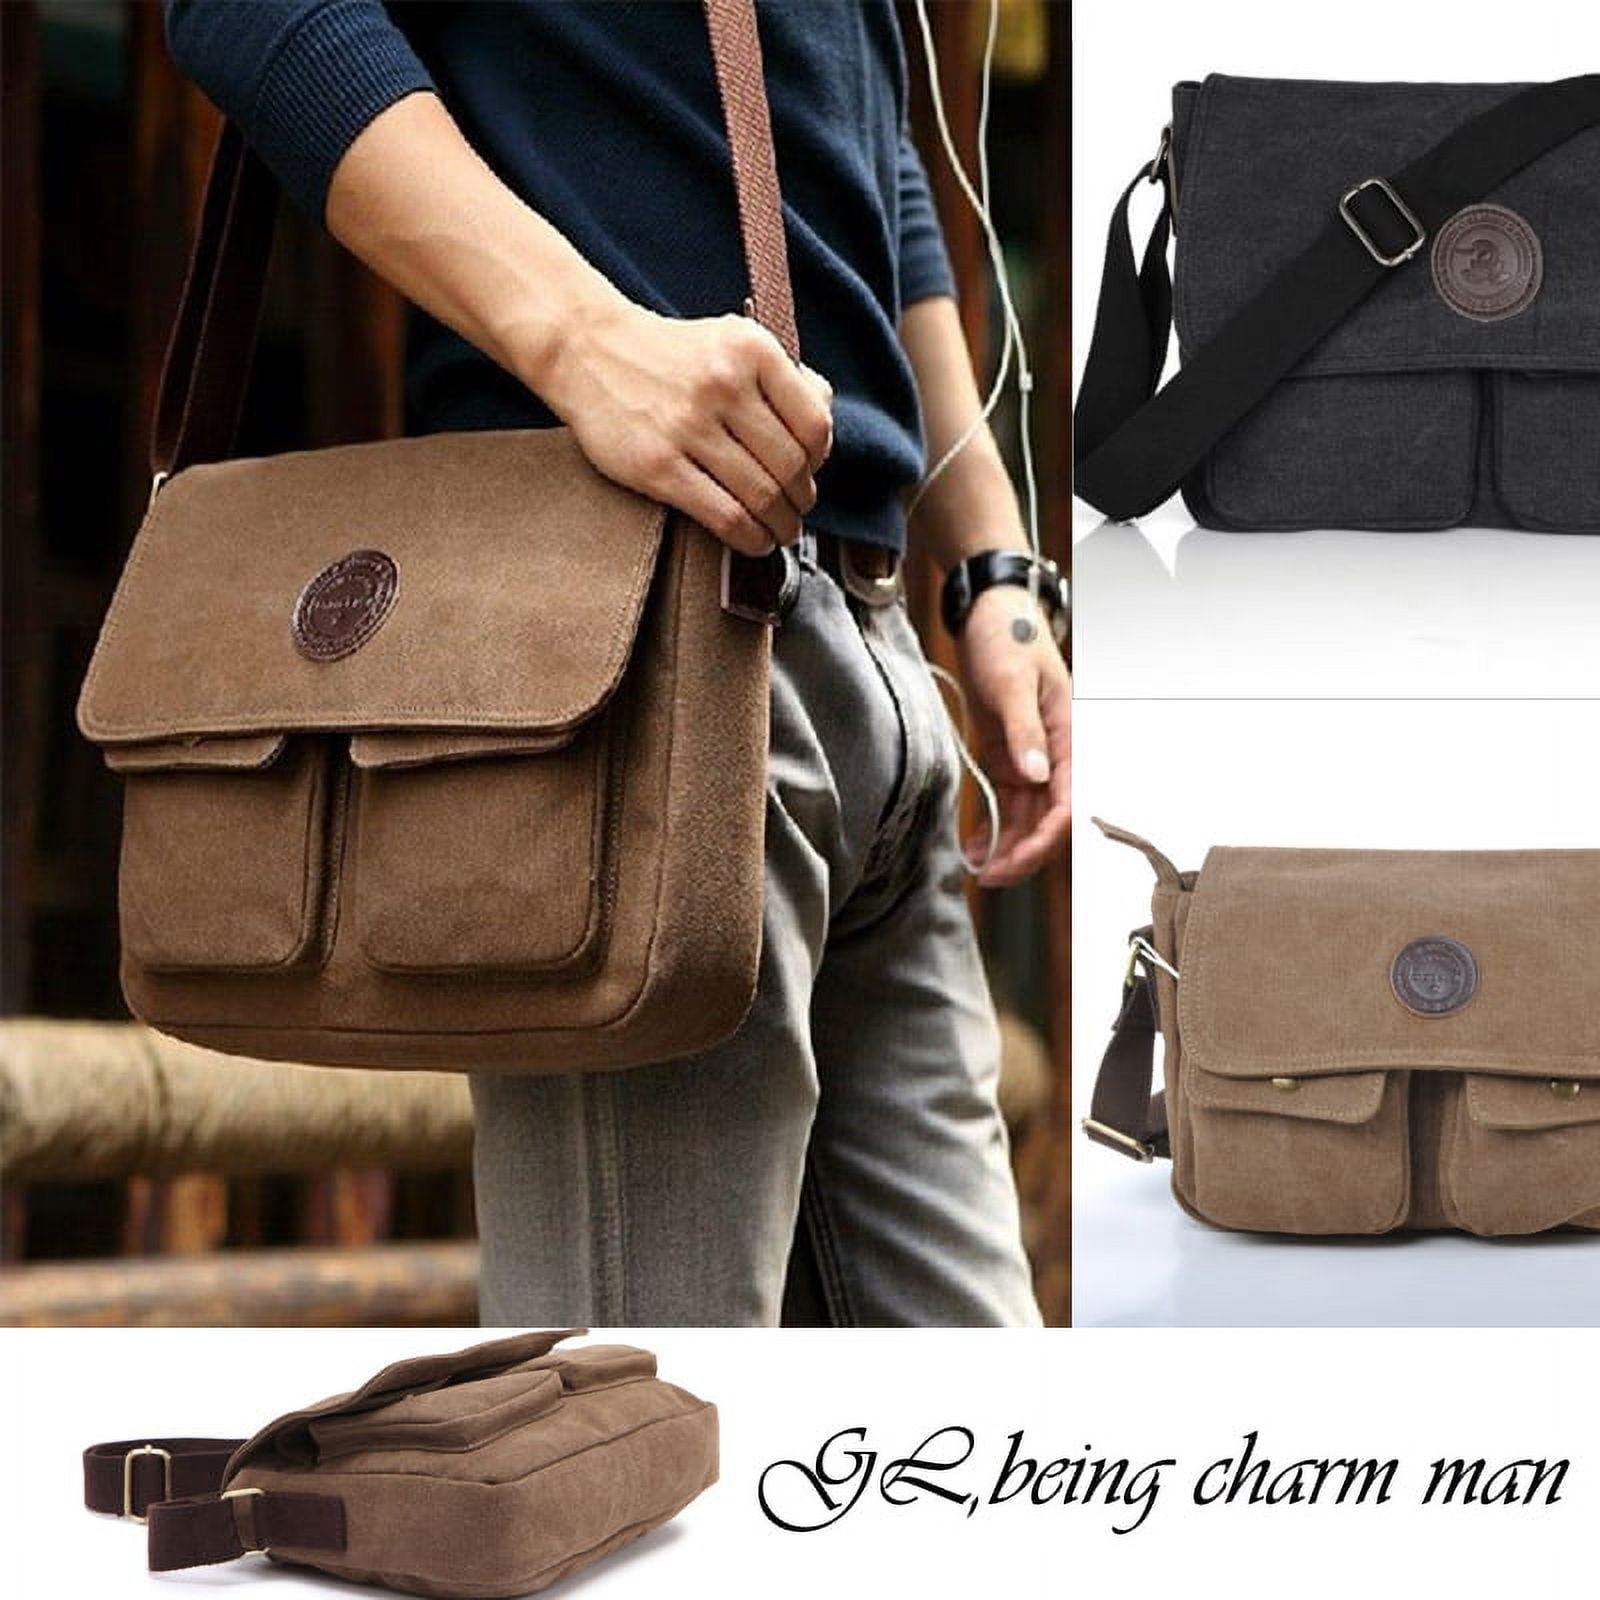 Hulsh Vintage Leather Laptop Bag for Men Full Grain Large Leather Messenger Bag for Men 18 Inches with Rustic Look Best Leather Briefcase